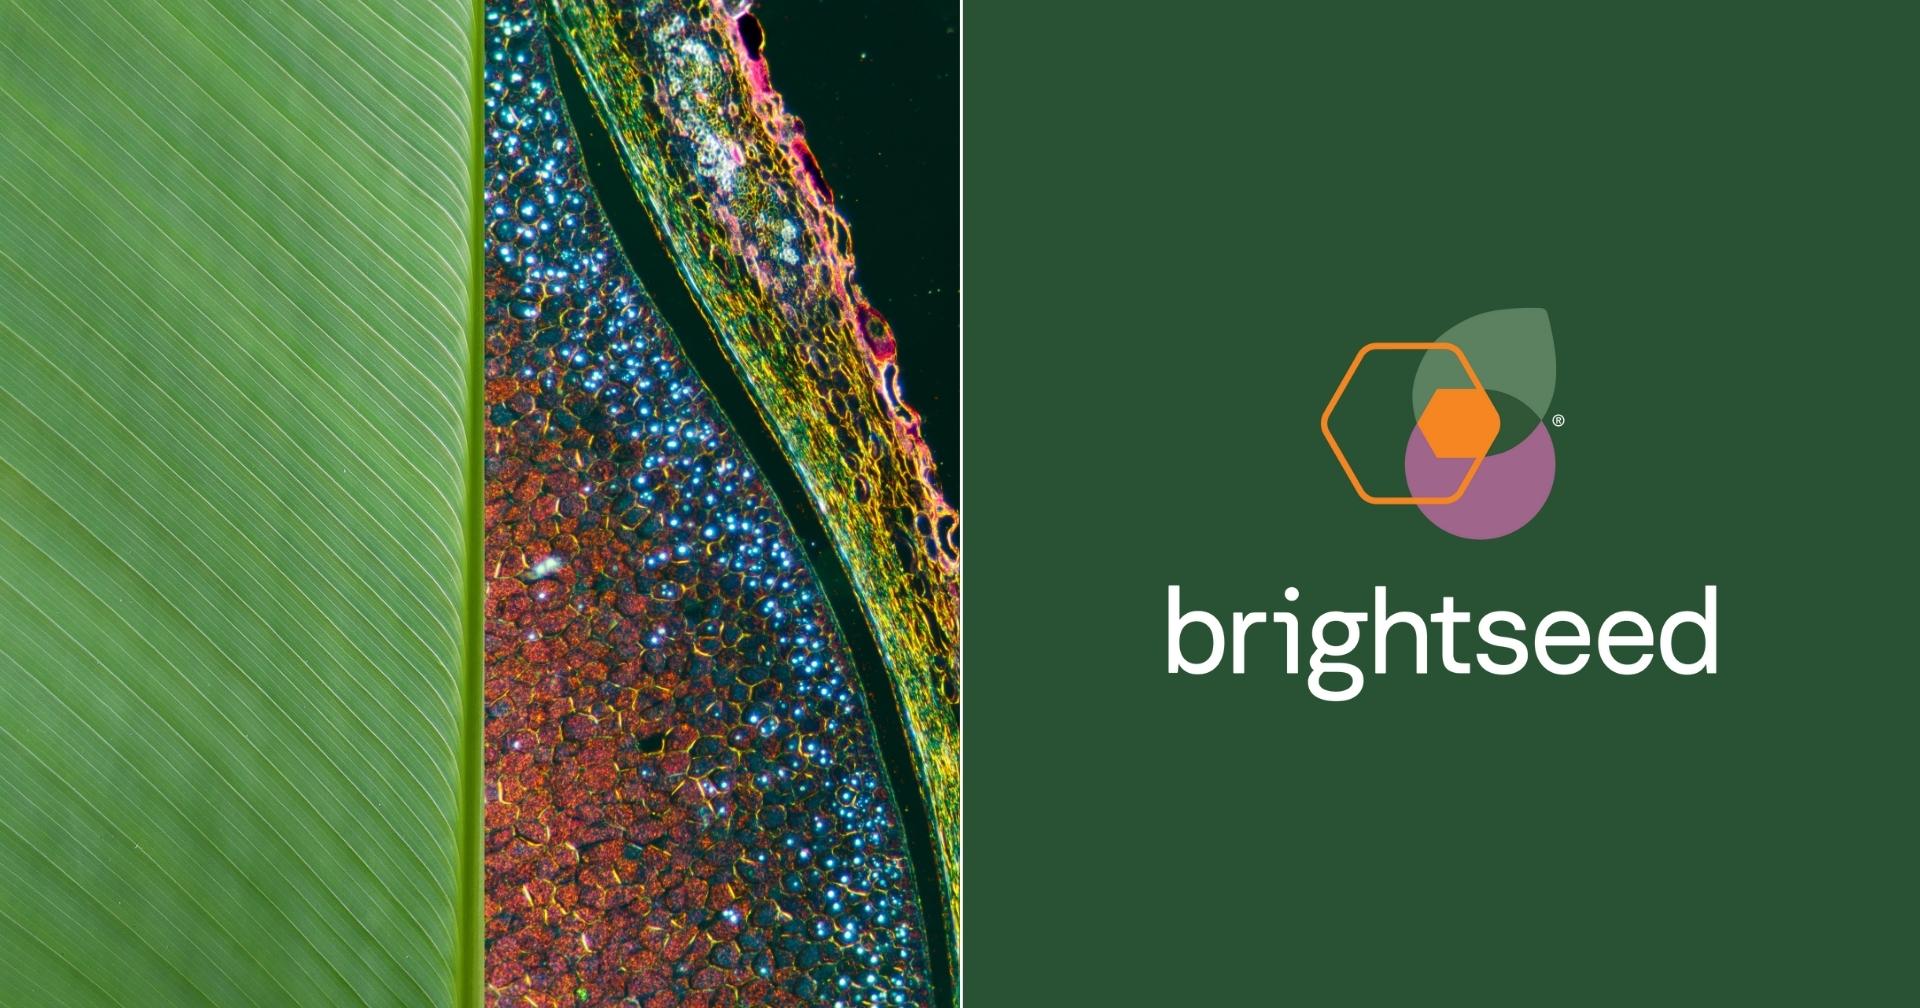 Brightseed Bioactives | We Find Nature's Answers to Health